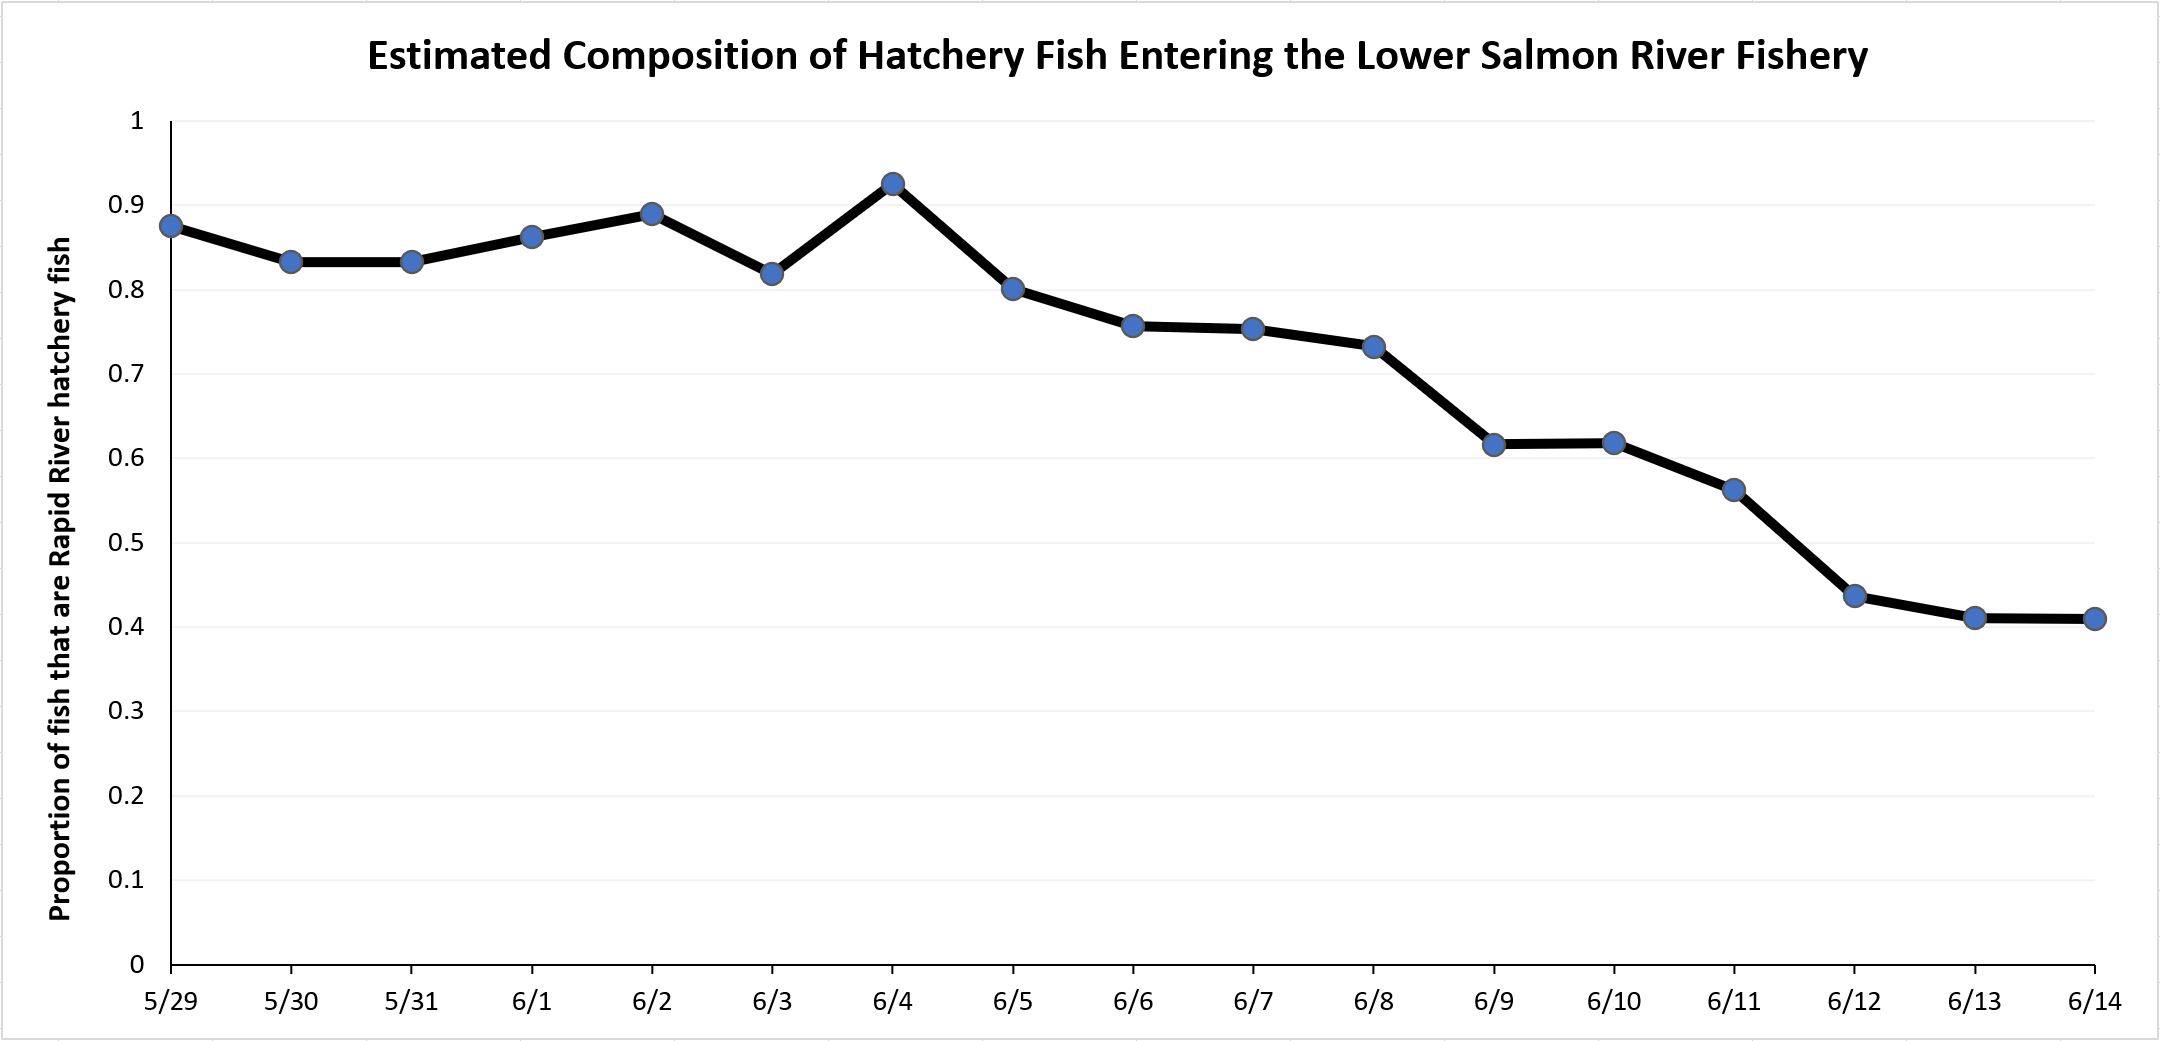 Stock composition of fish entering lower Salmon River